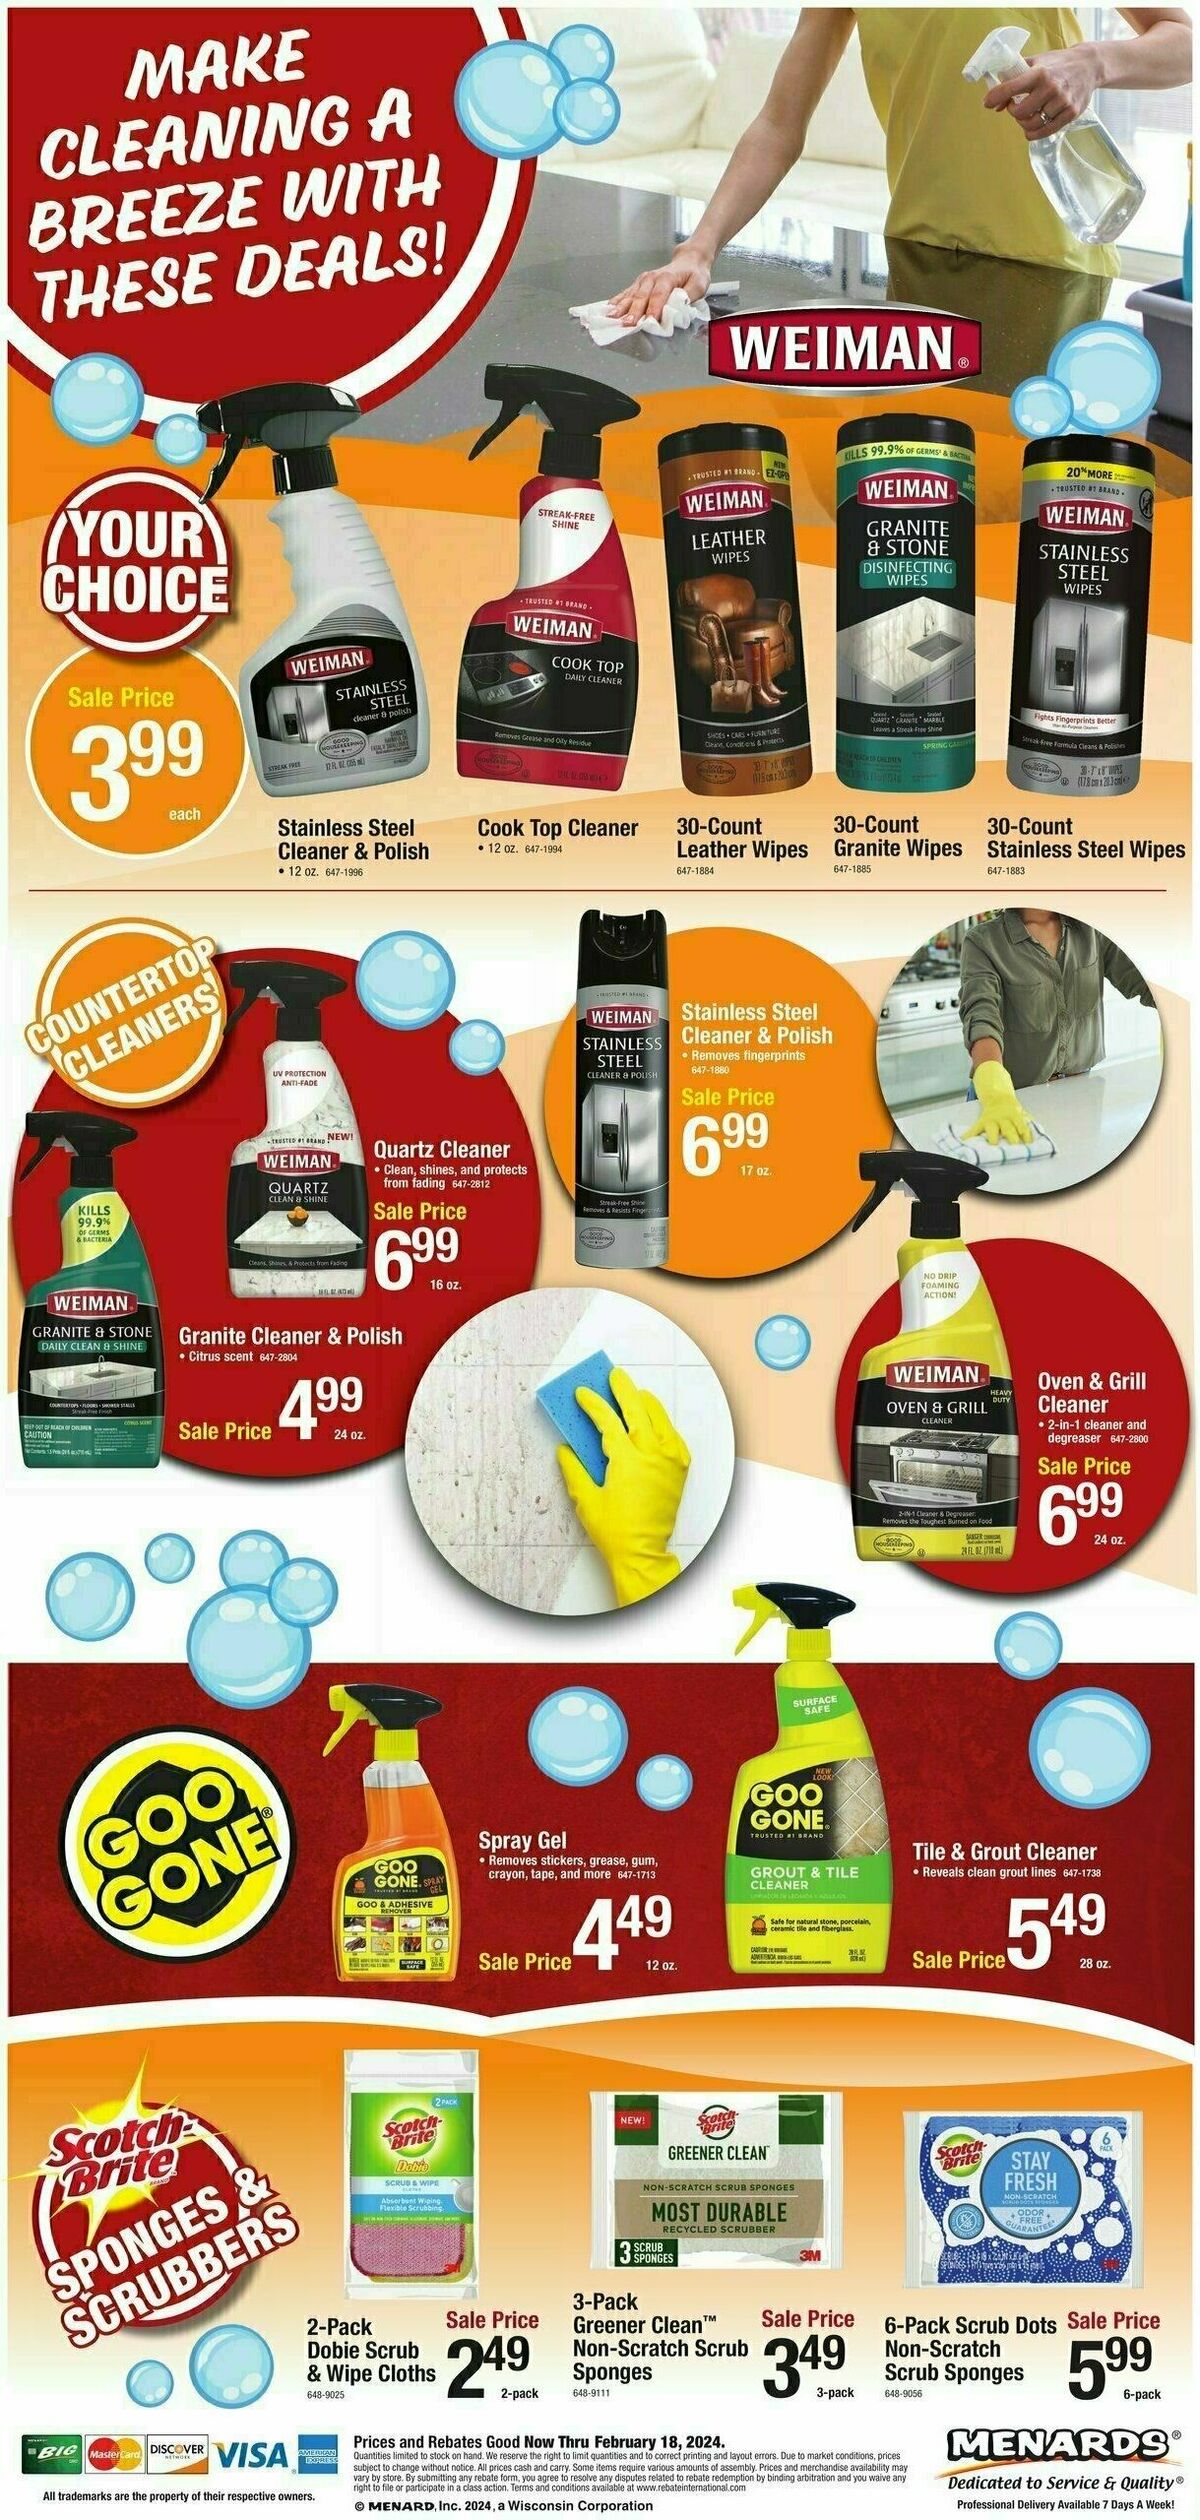 Menards Home Essentials Weekly Ad from February 7